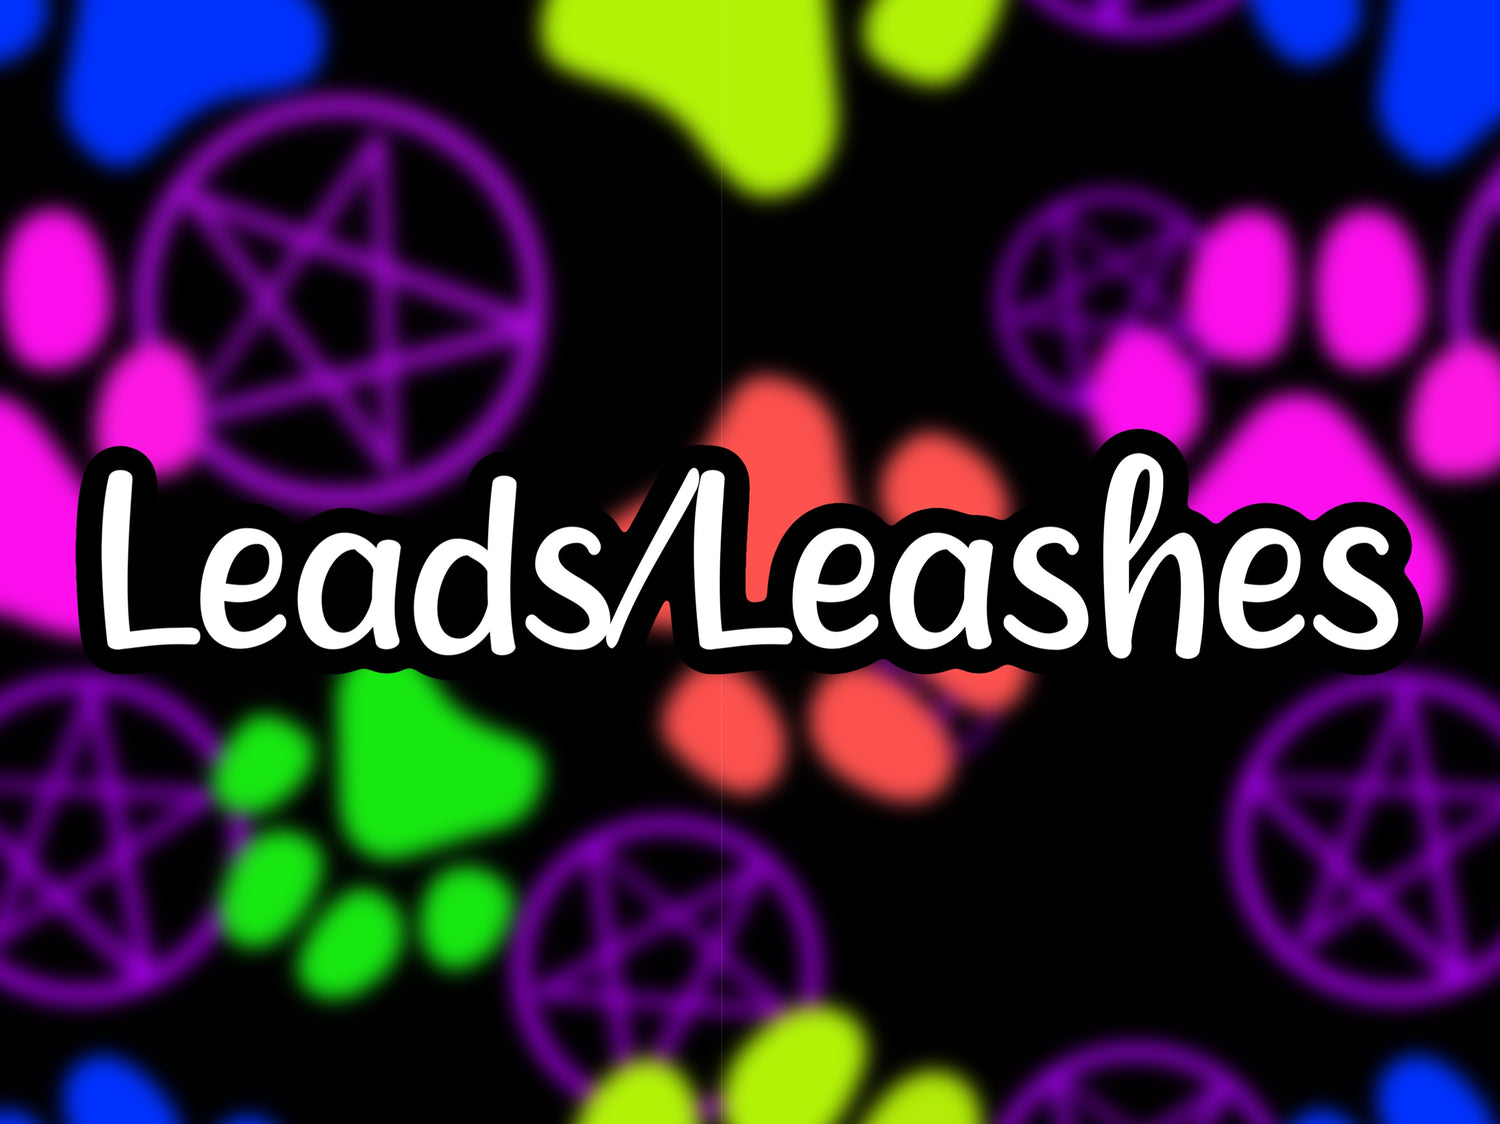 Leads/Leashes